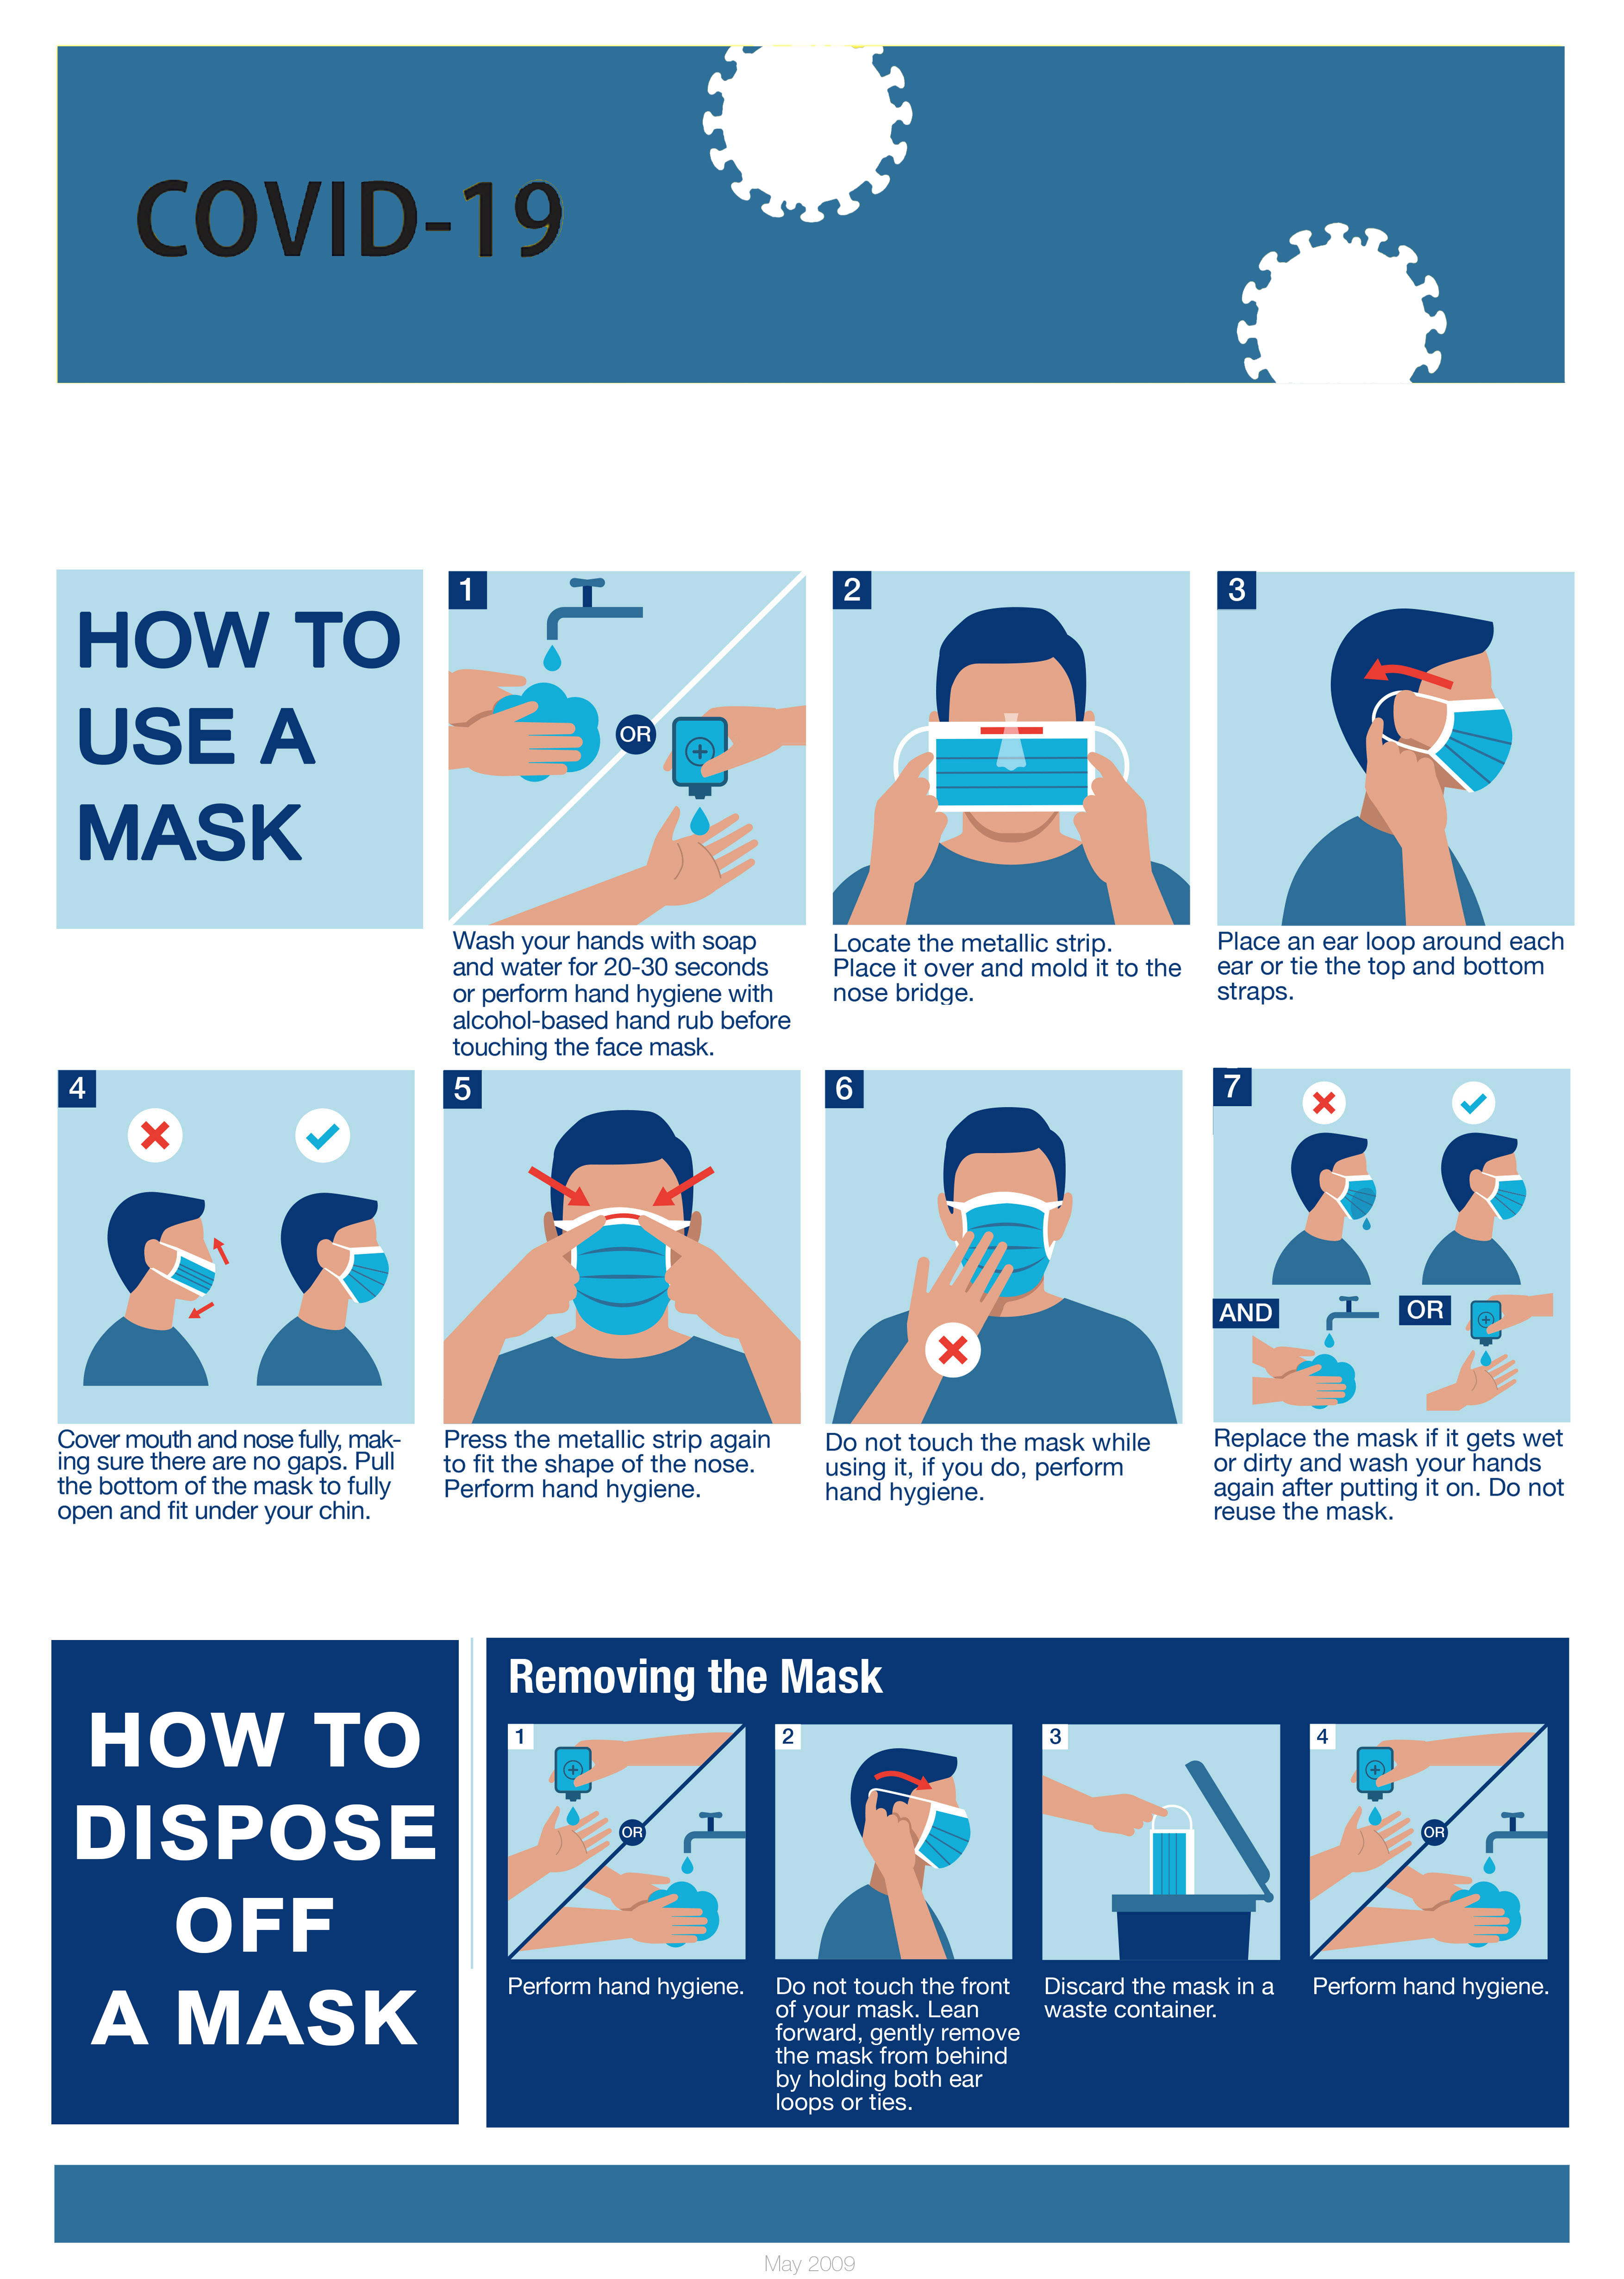 HOW TO USE A MASK